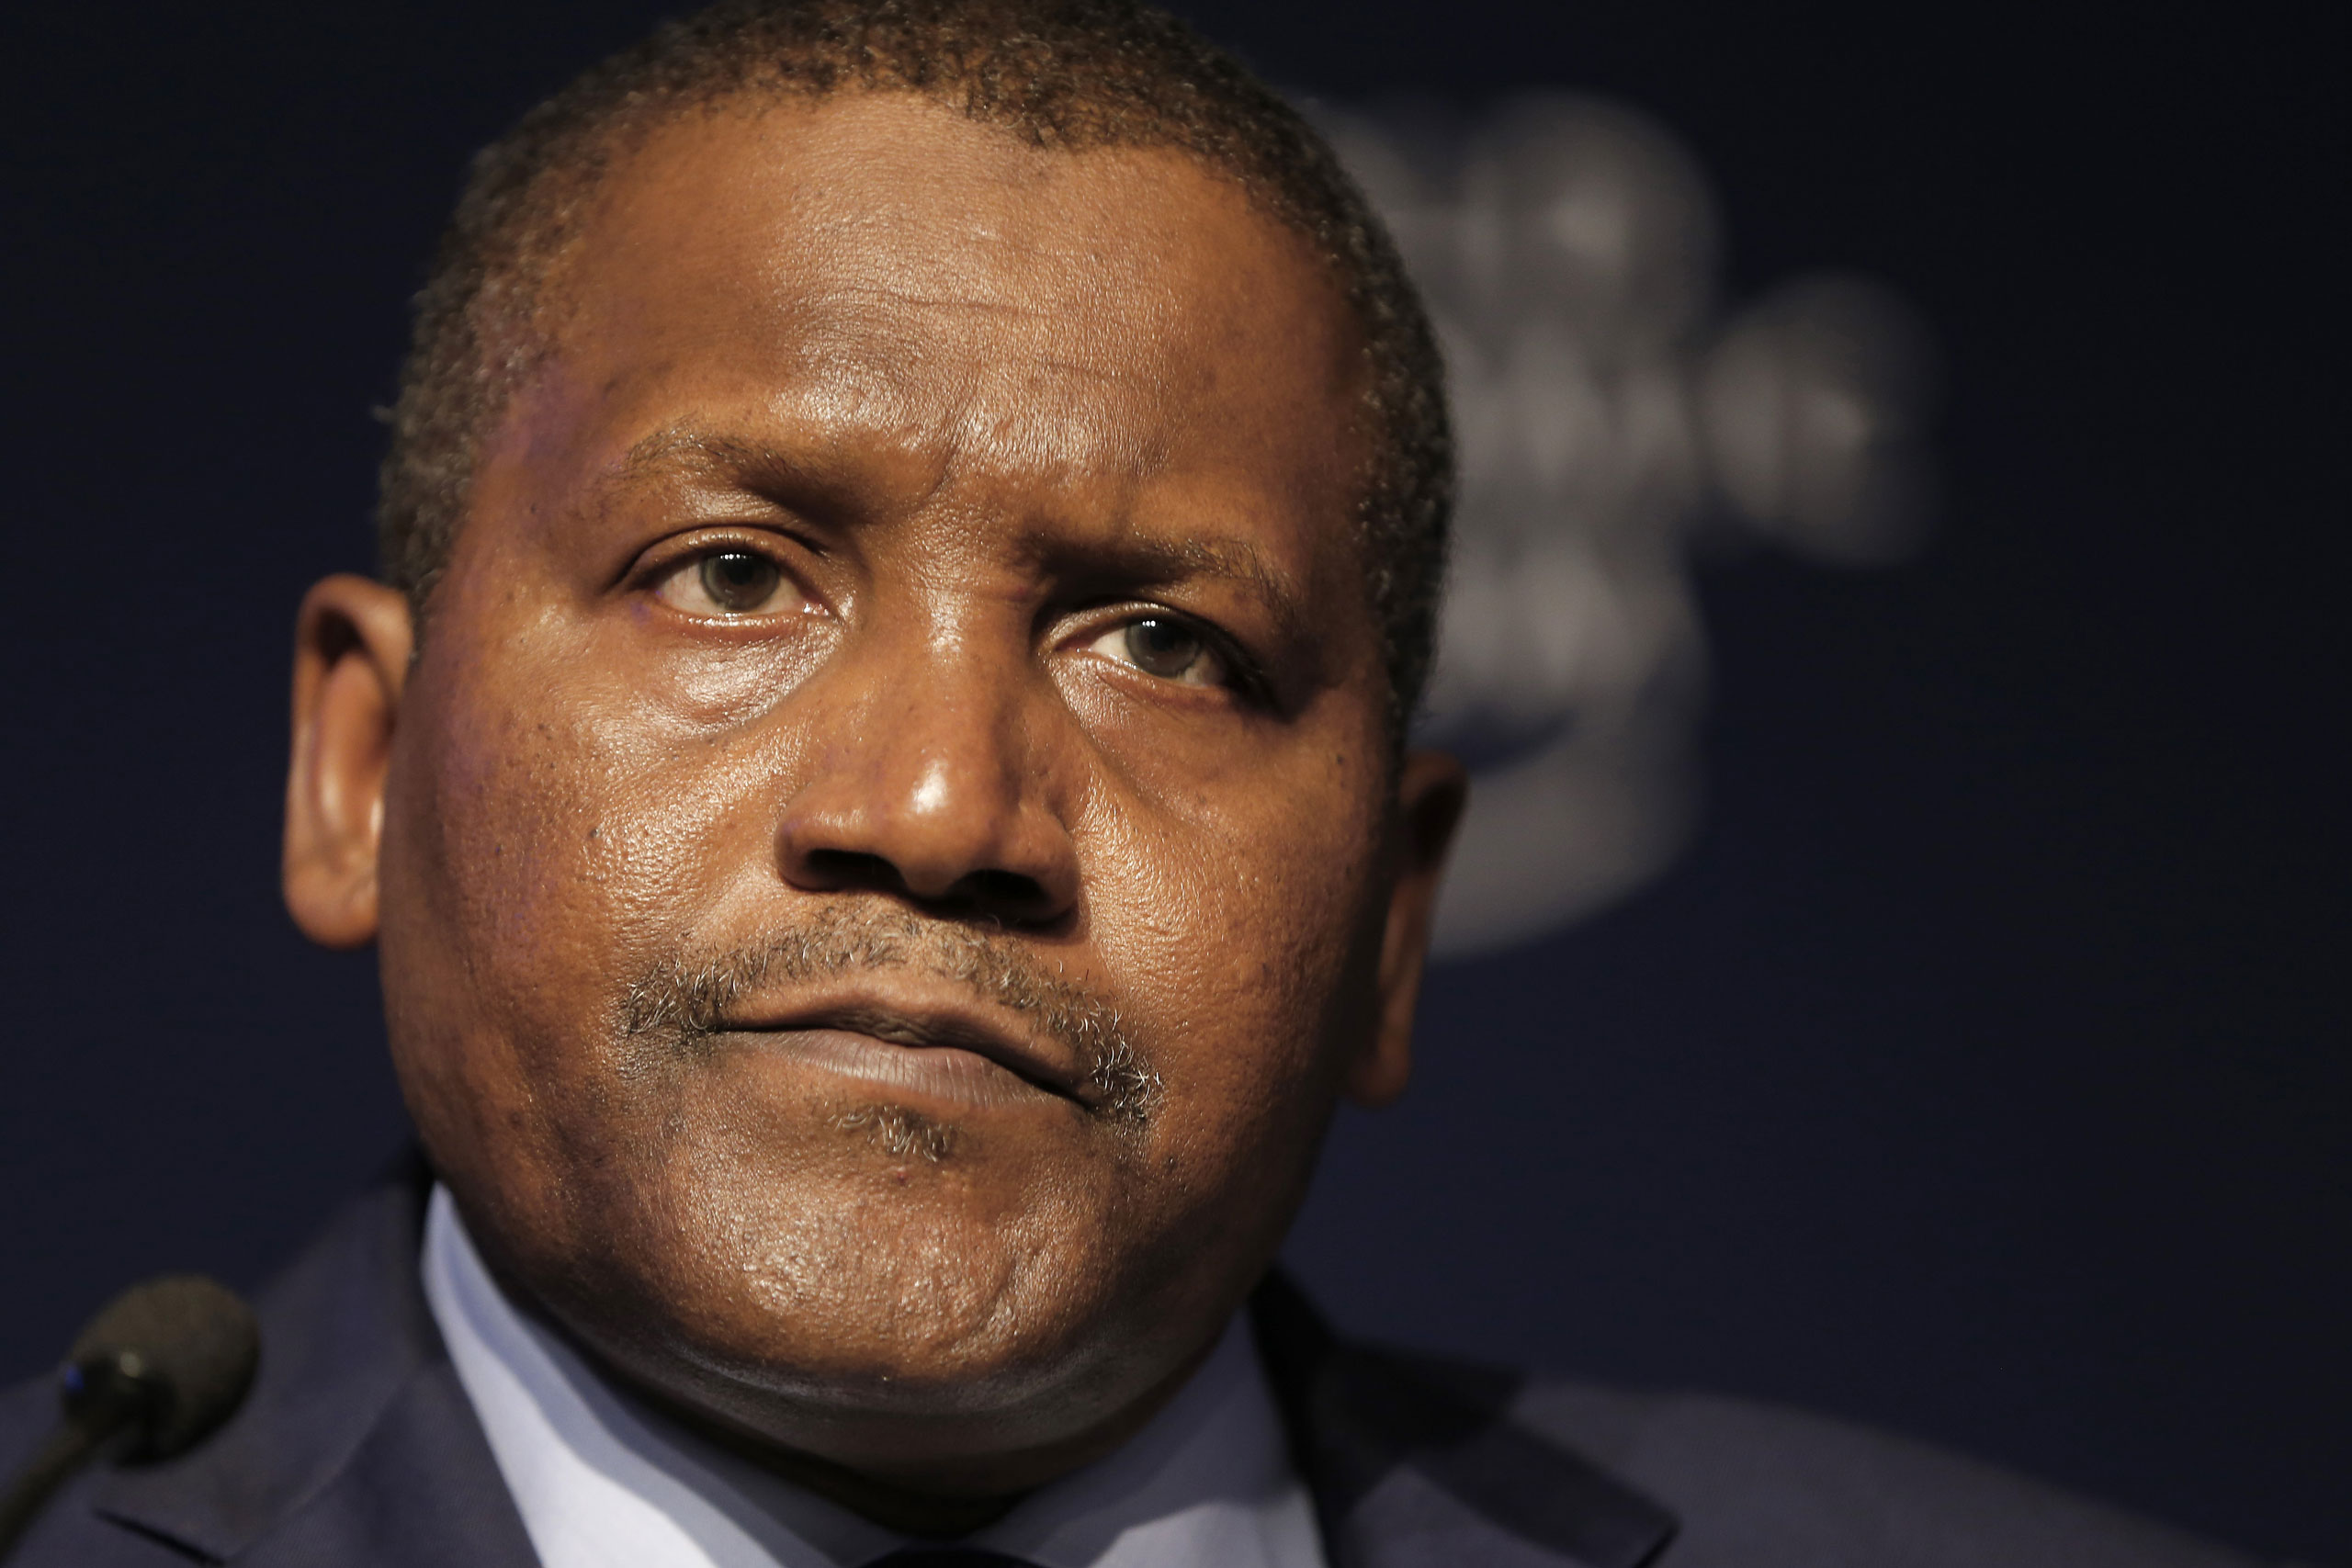 Aliko Dangote, billionaire and chief executive officer of Dangote Group, pauses during a session on day two of the World Economic Forum (WEF) in Davos, Switzerland, Jan. 22, 2015. (Jason Alden—Bloomberg/Getty Images)